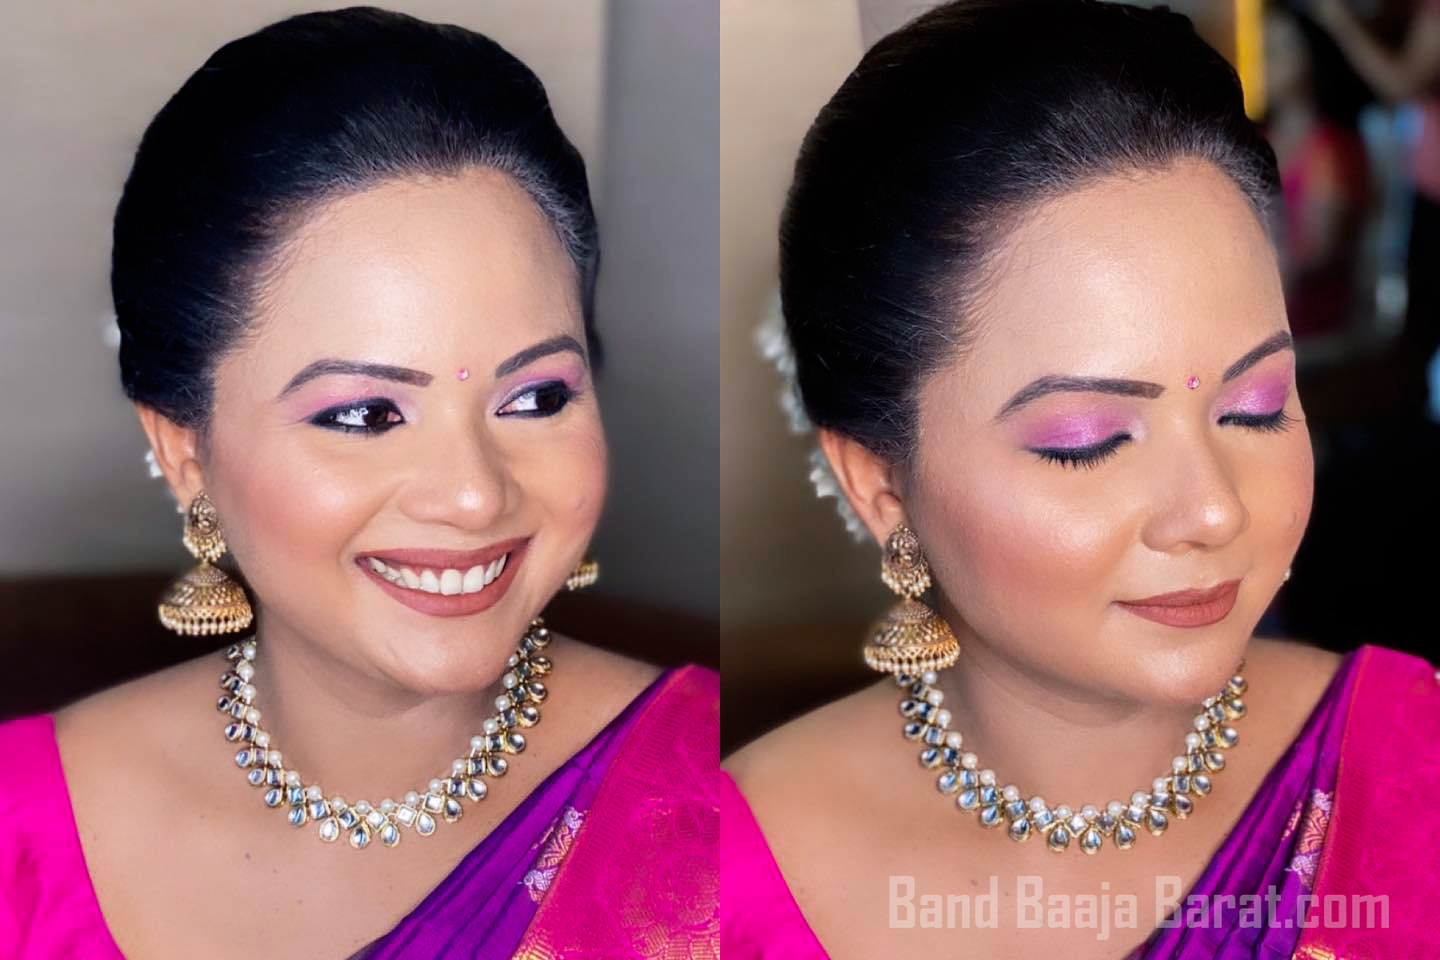 Makeup By Sonal Sharma Makeovers in delhi